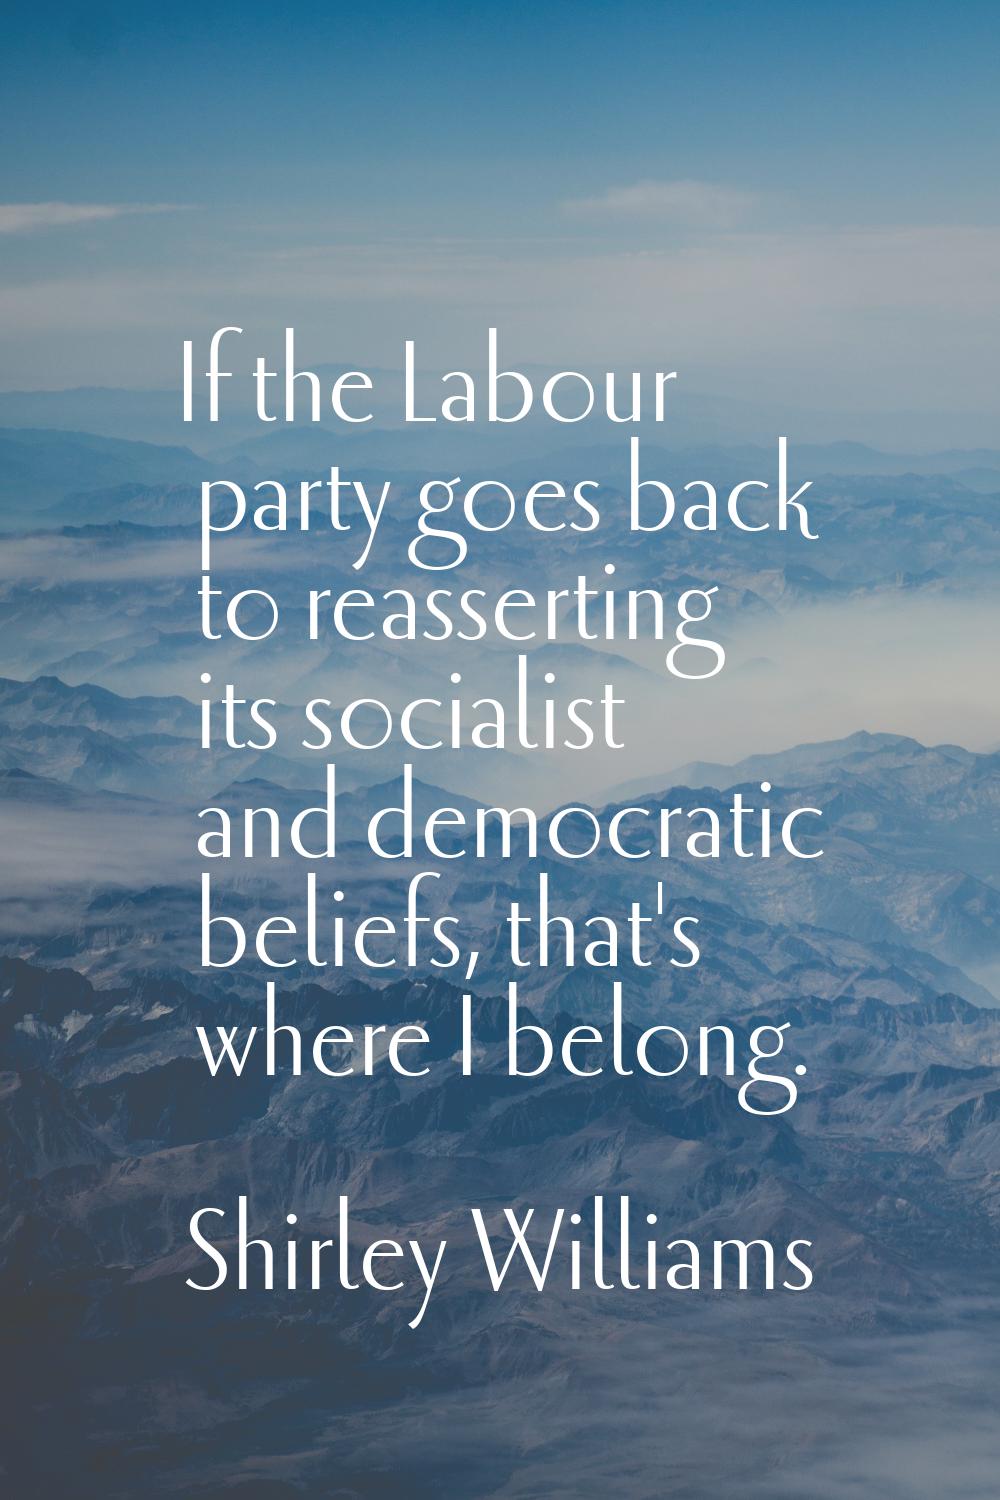 If the Labour party goes back to reasserting its socialist and democratic beliefs, that's where I b